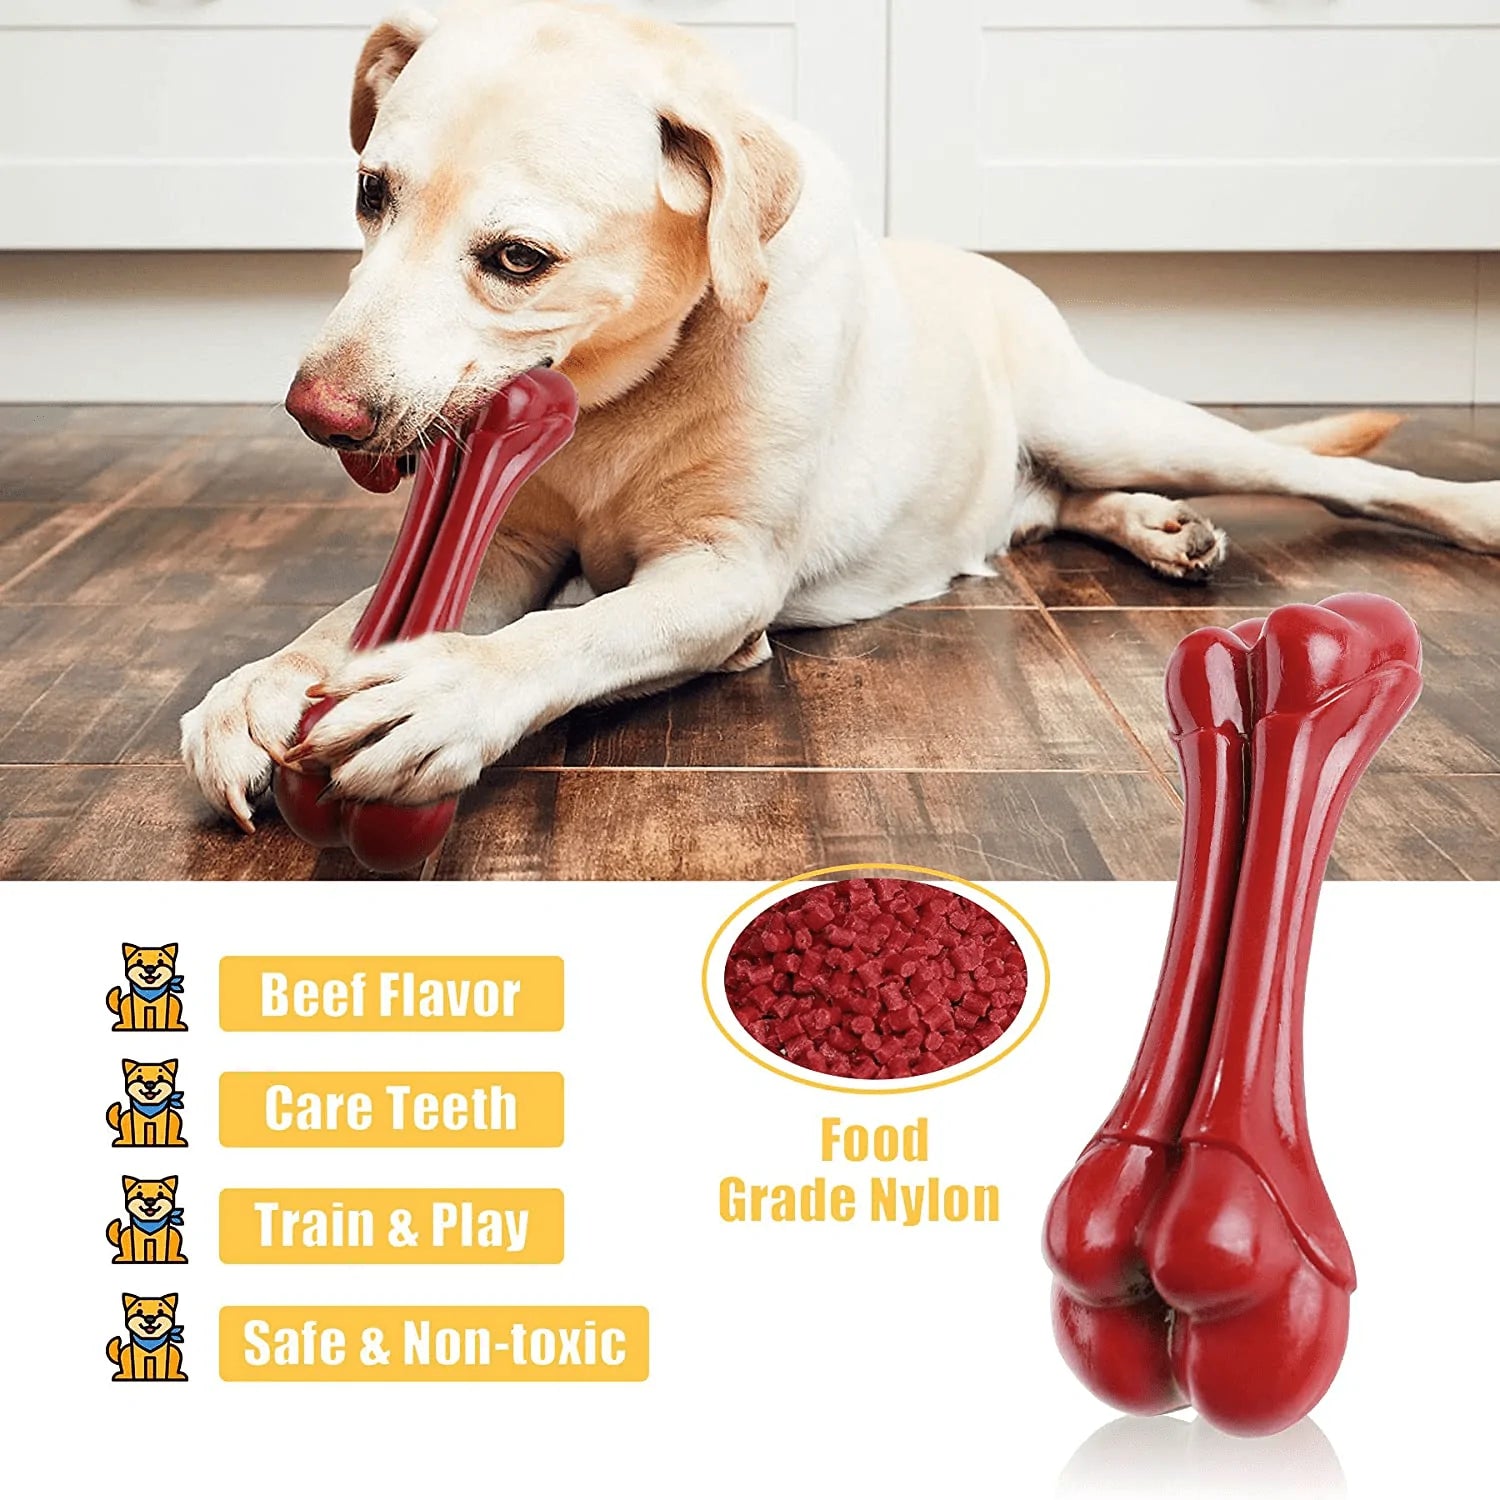 Zeaxuie Heavy Duty Dog Chew Toys for Aggressive Chewers - 9 Pack Value Set Includes Indestructible Rope Toys & Squeaky Toys for Large Breeds Animals & Pet Supplies > Pet Supplies > Dog Supplies > Dog Toys Zeaxuie   